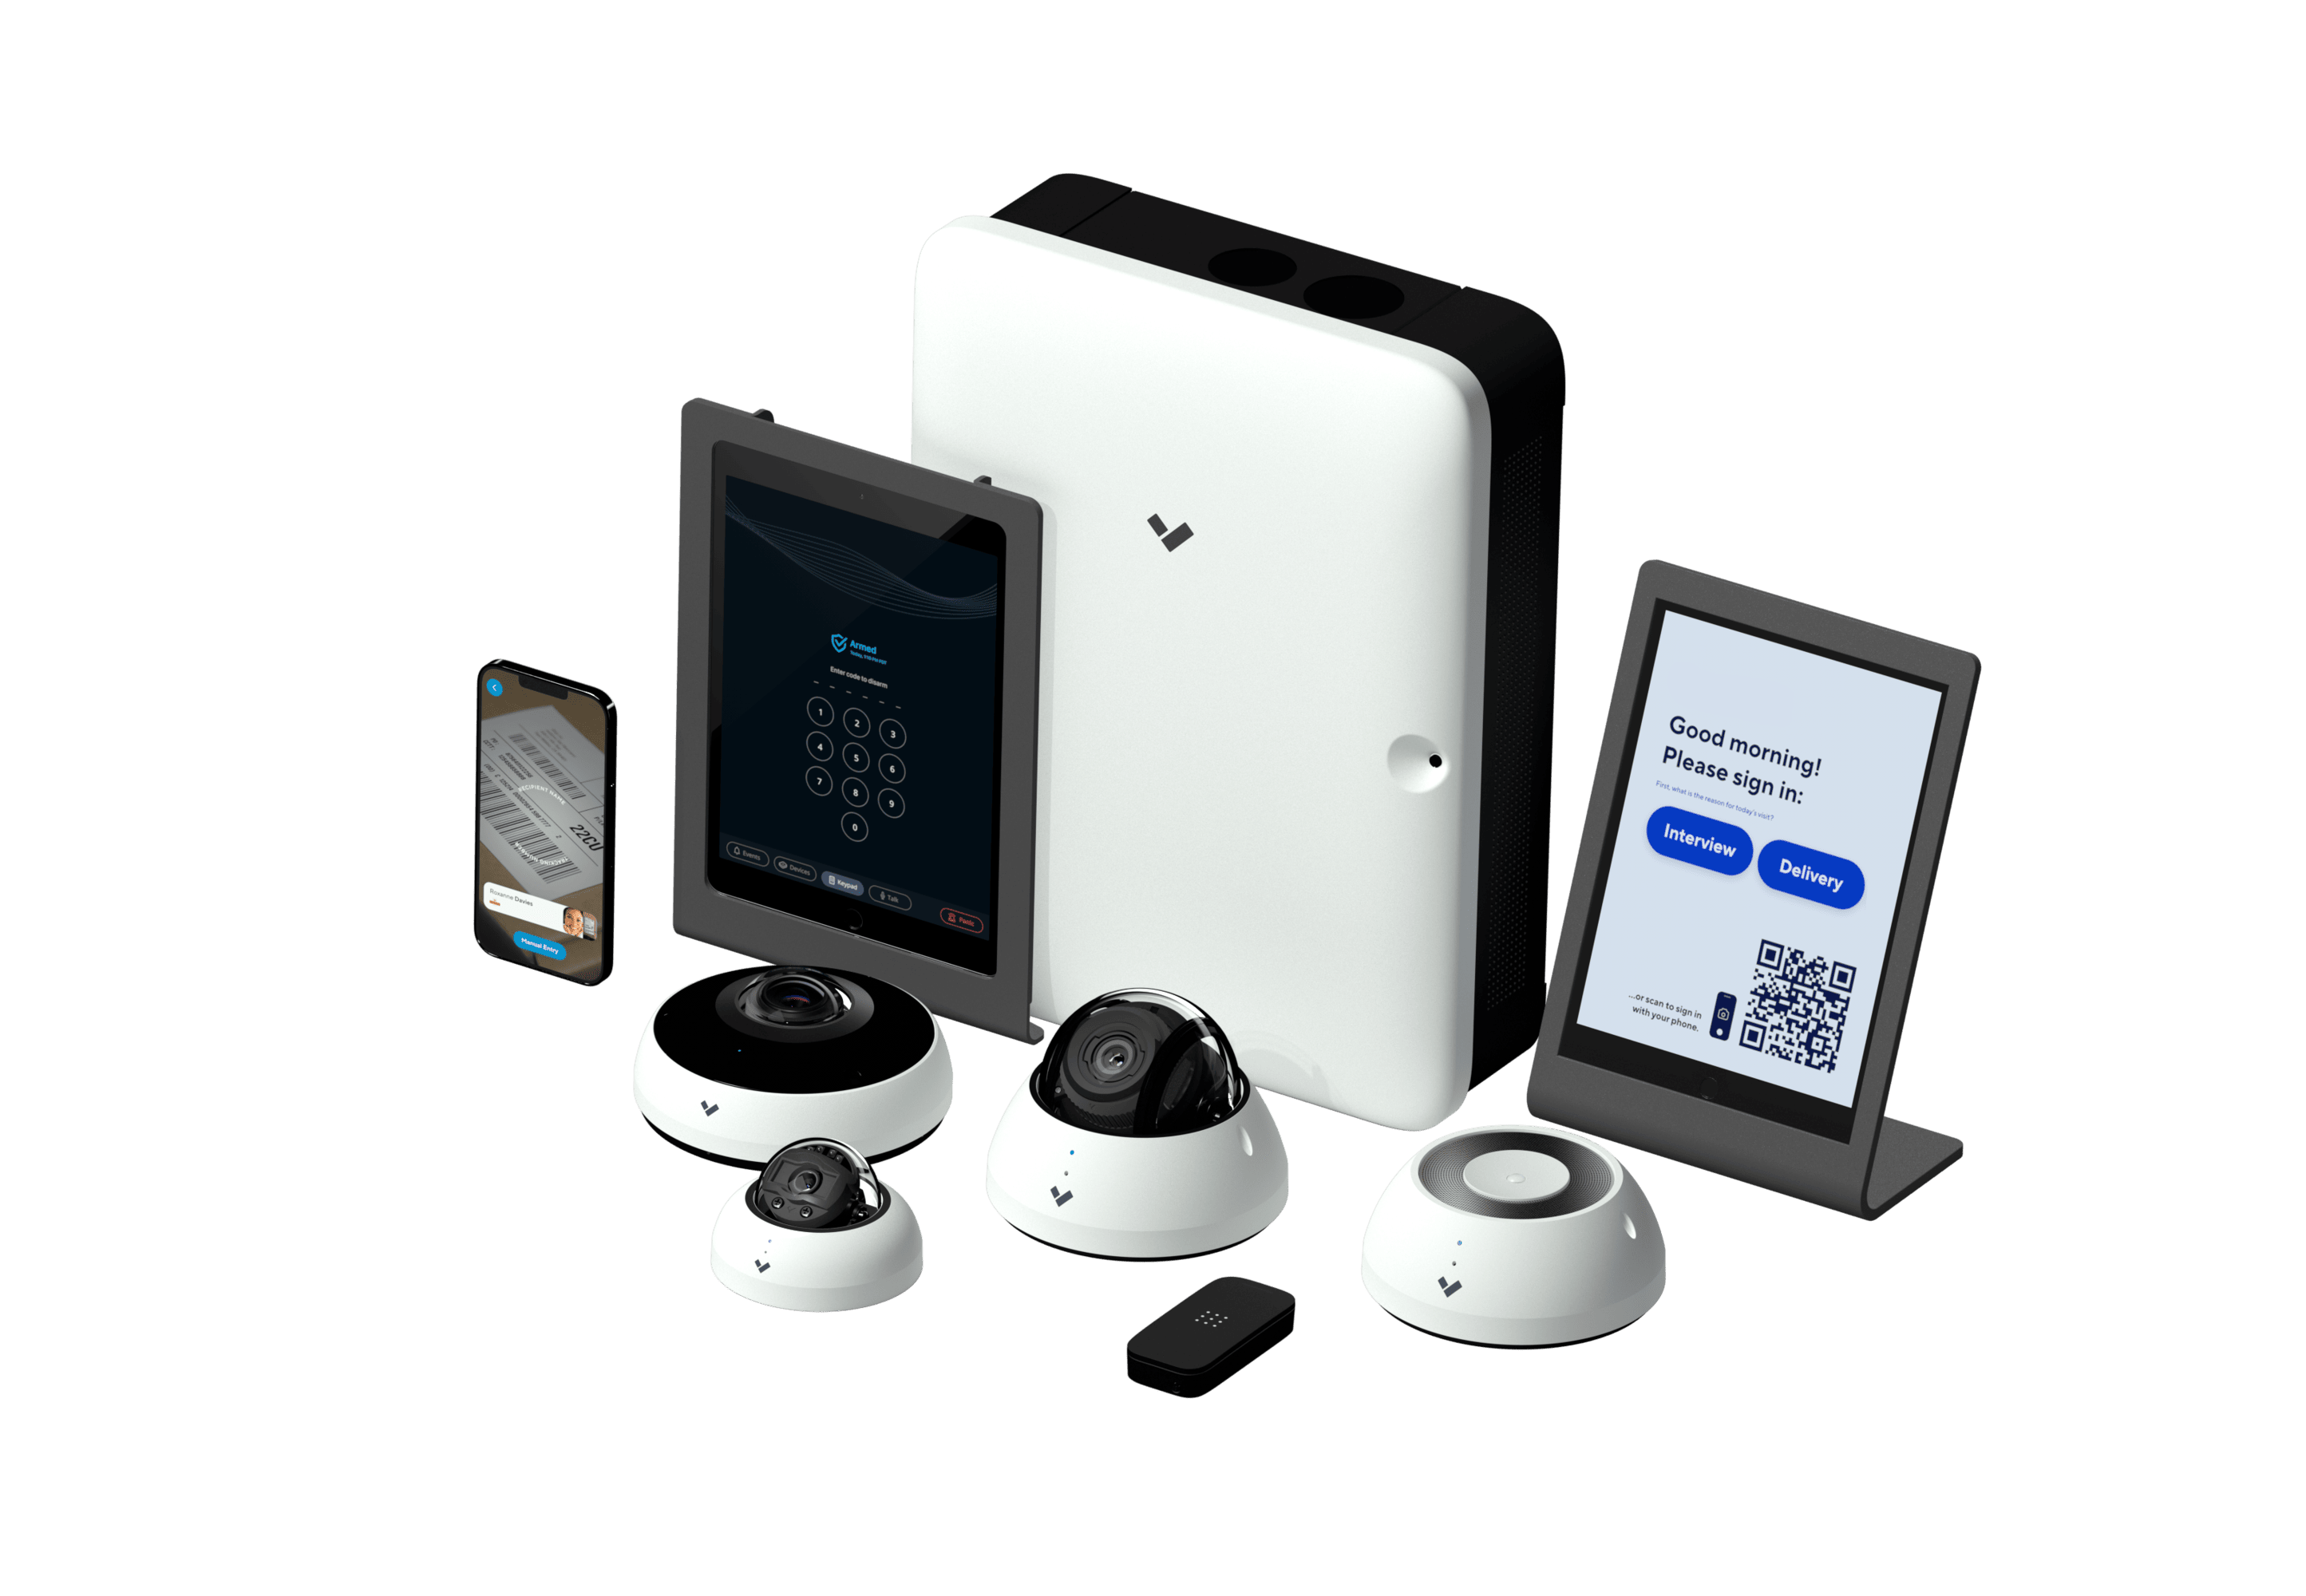 Verkada Device family used for building security needs